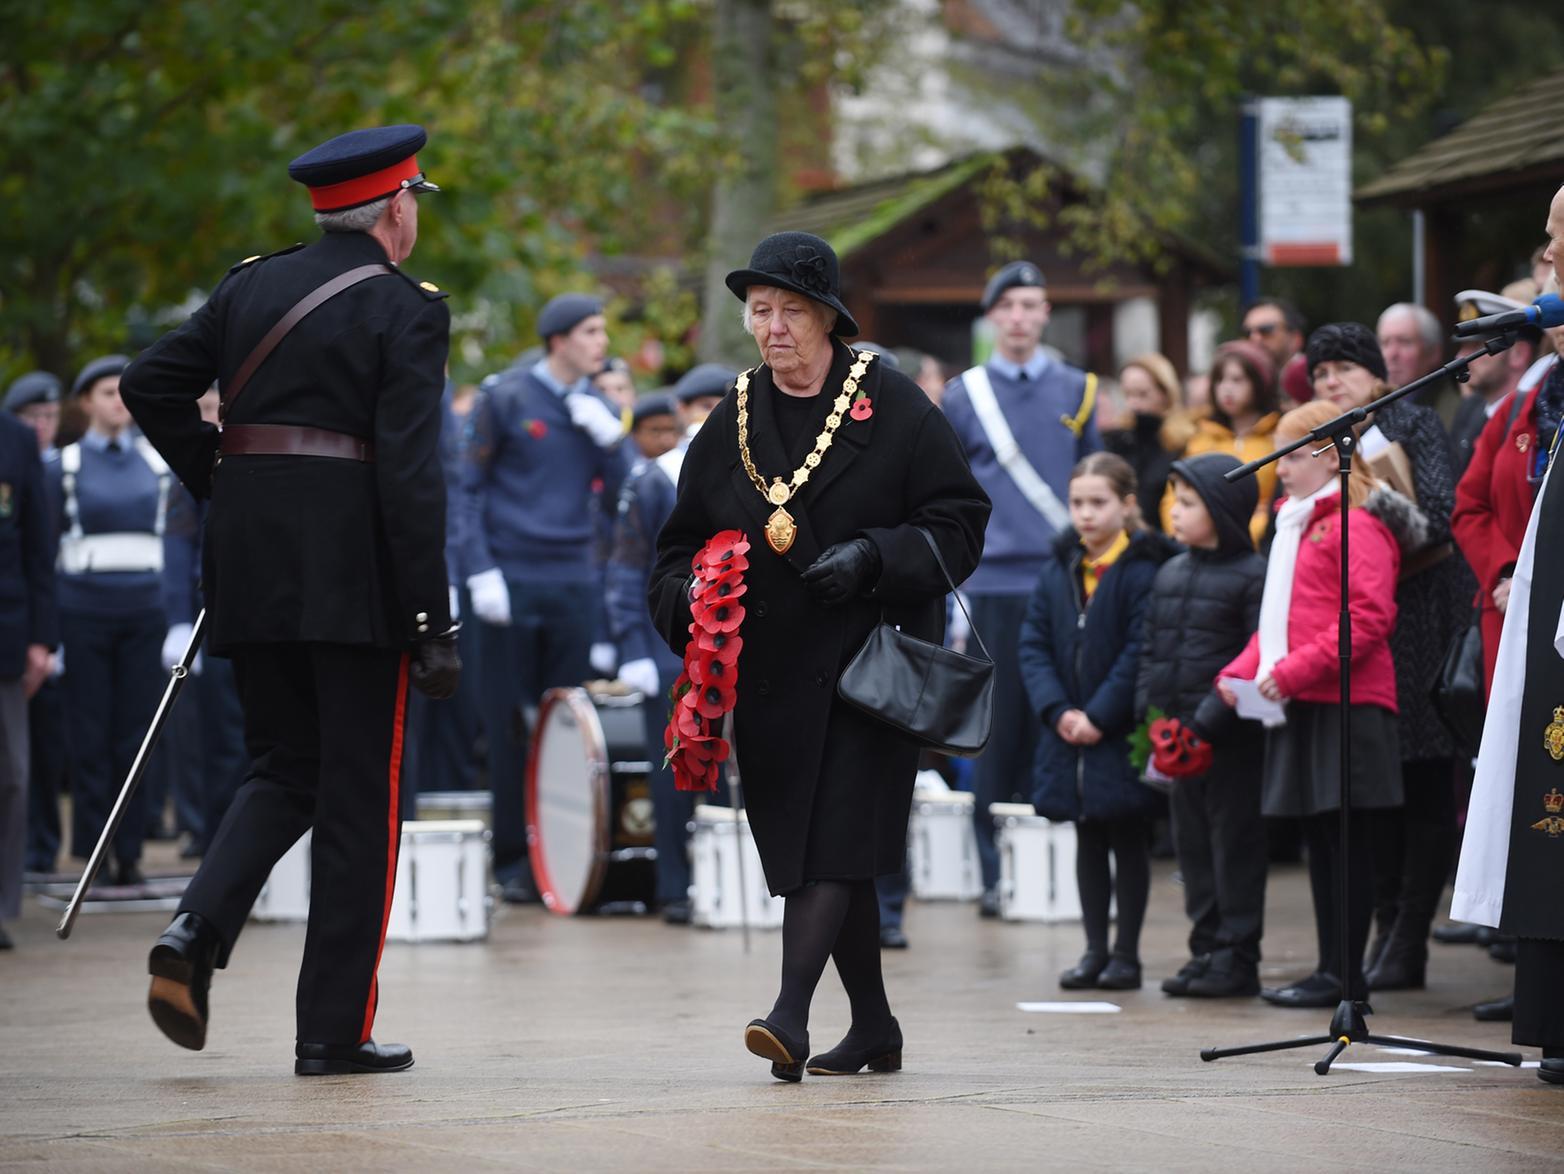 Chairman Barbara Johnson during the wreath laying on the Square.